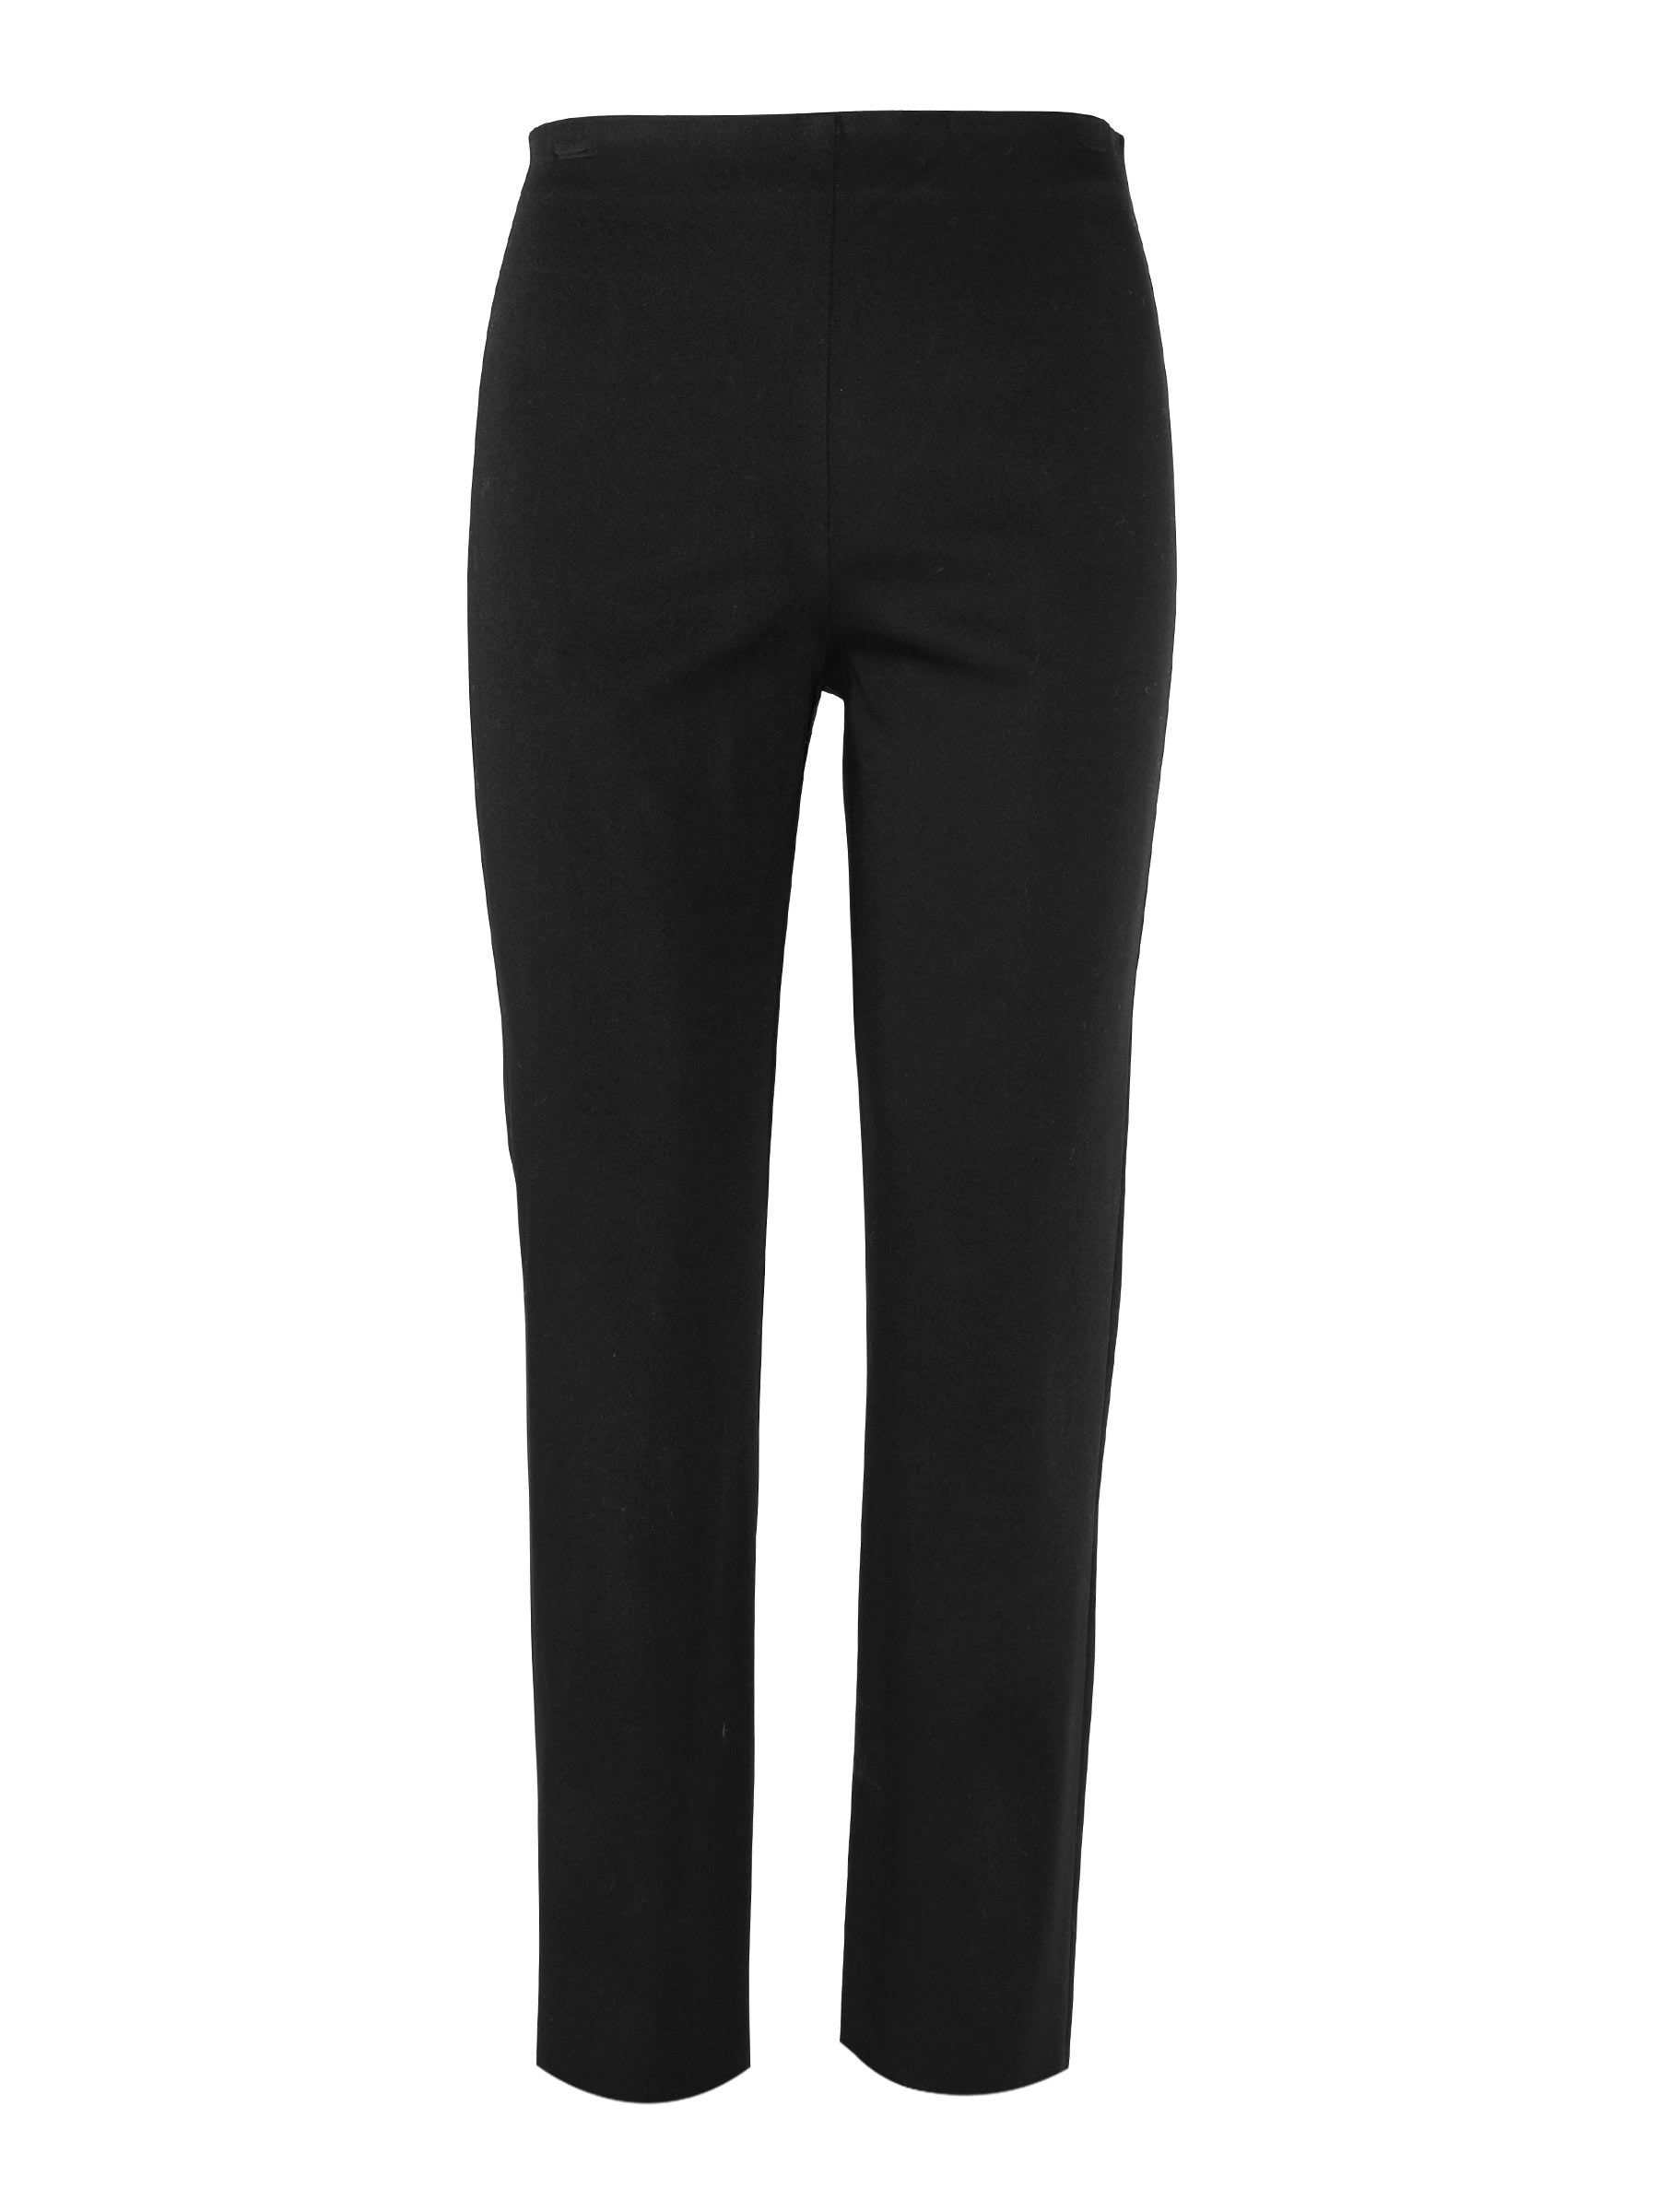 SILLS - 10942 Astair Pant - Frontline Designer Clothes and Accessories